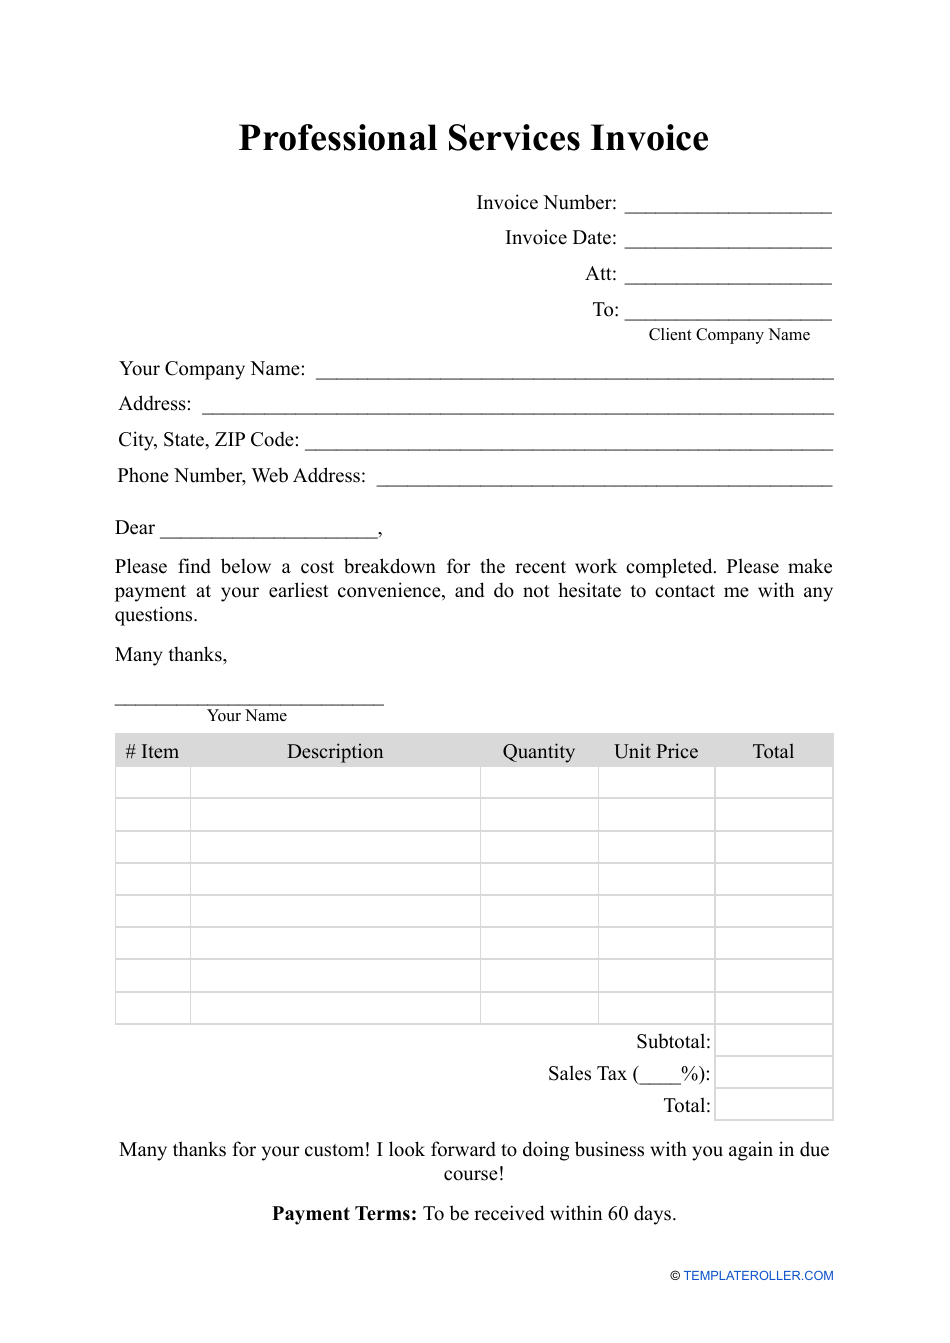 Professional Services Invoice Template Fill Out, Sign Online and